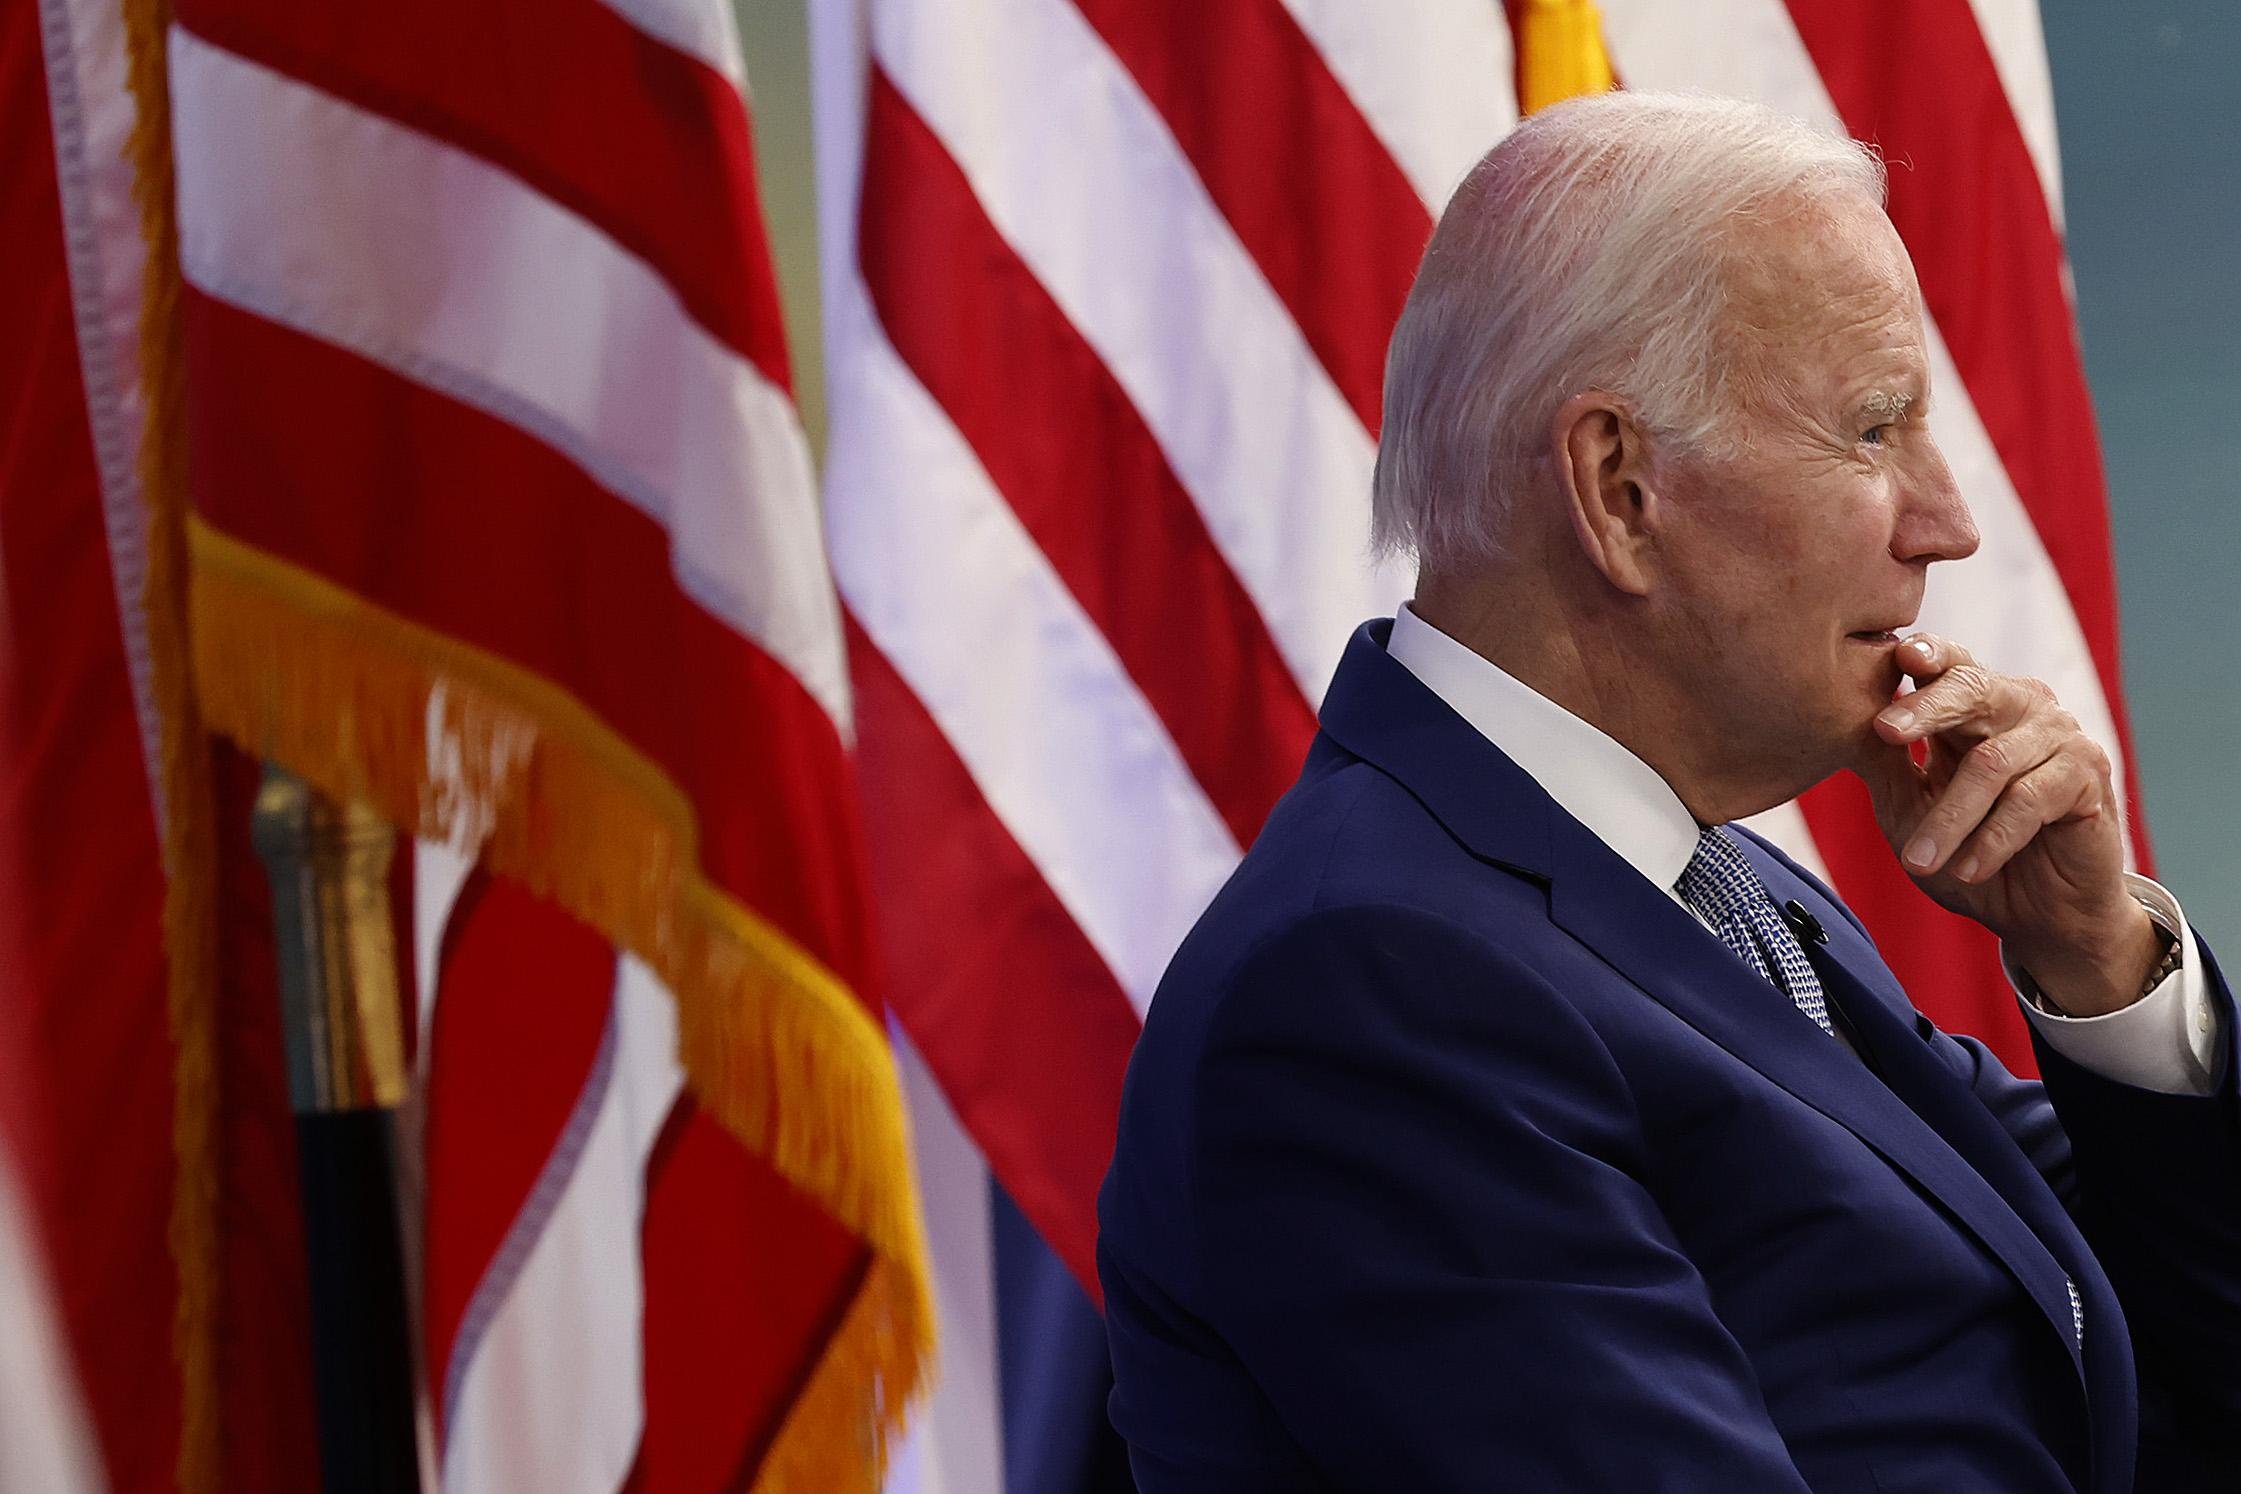 A photo of President Joe Biden, from the side, in front of an American flag.